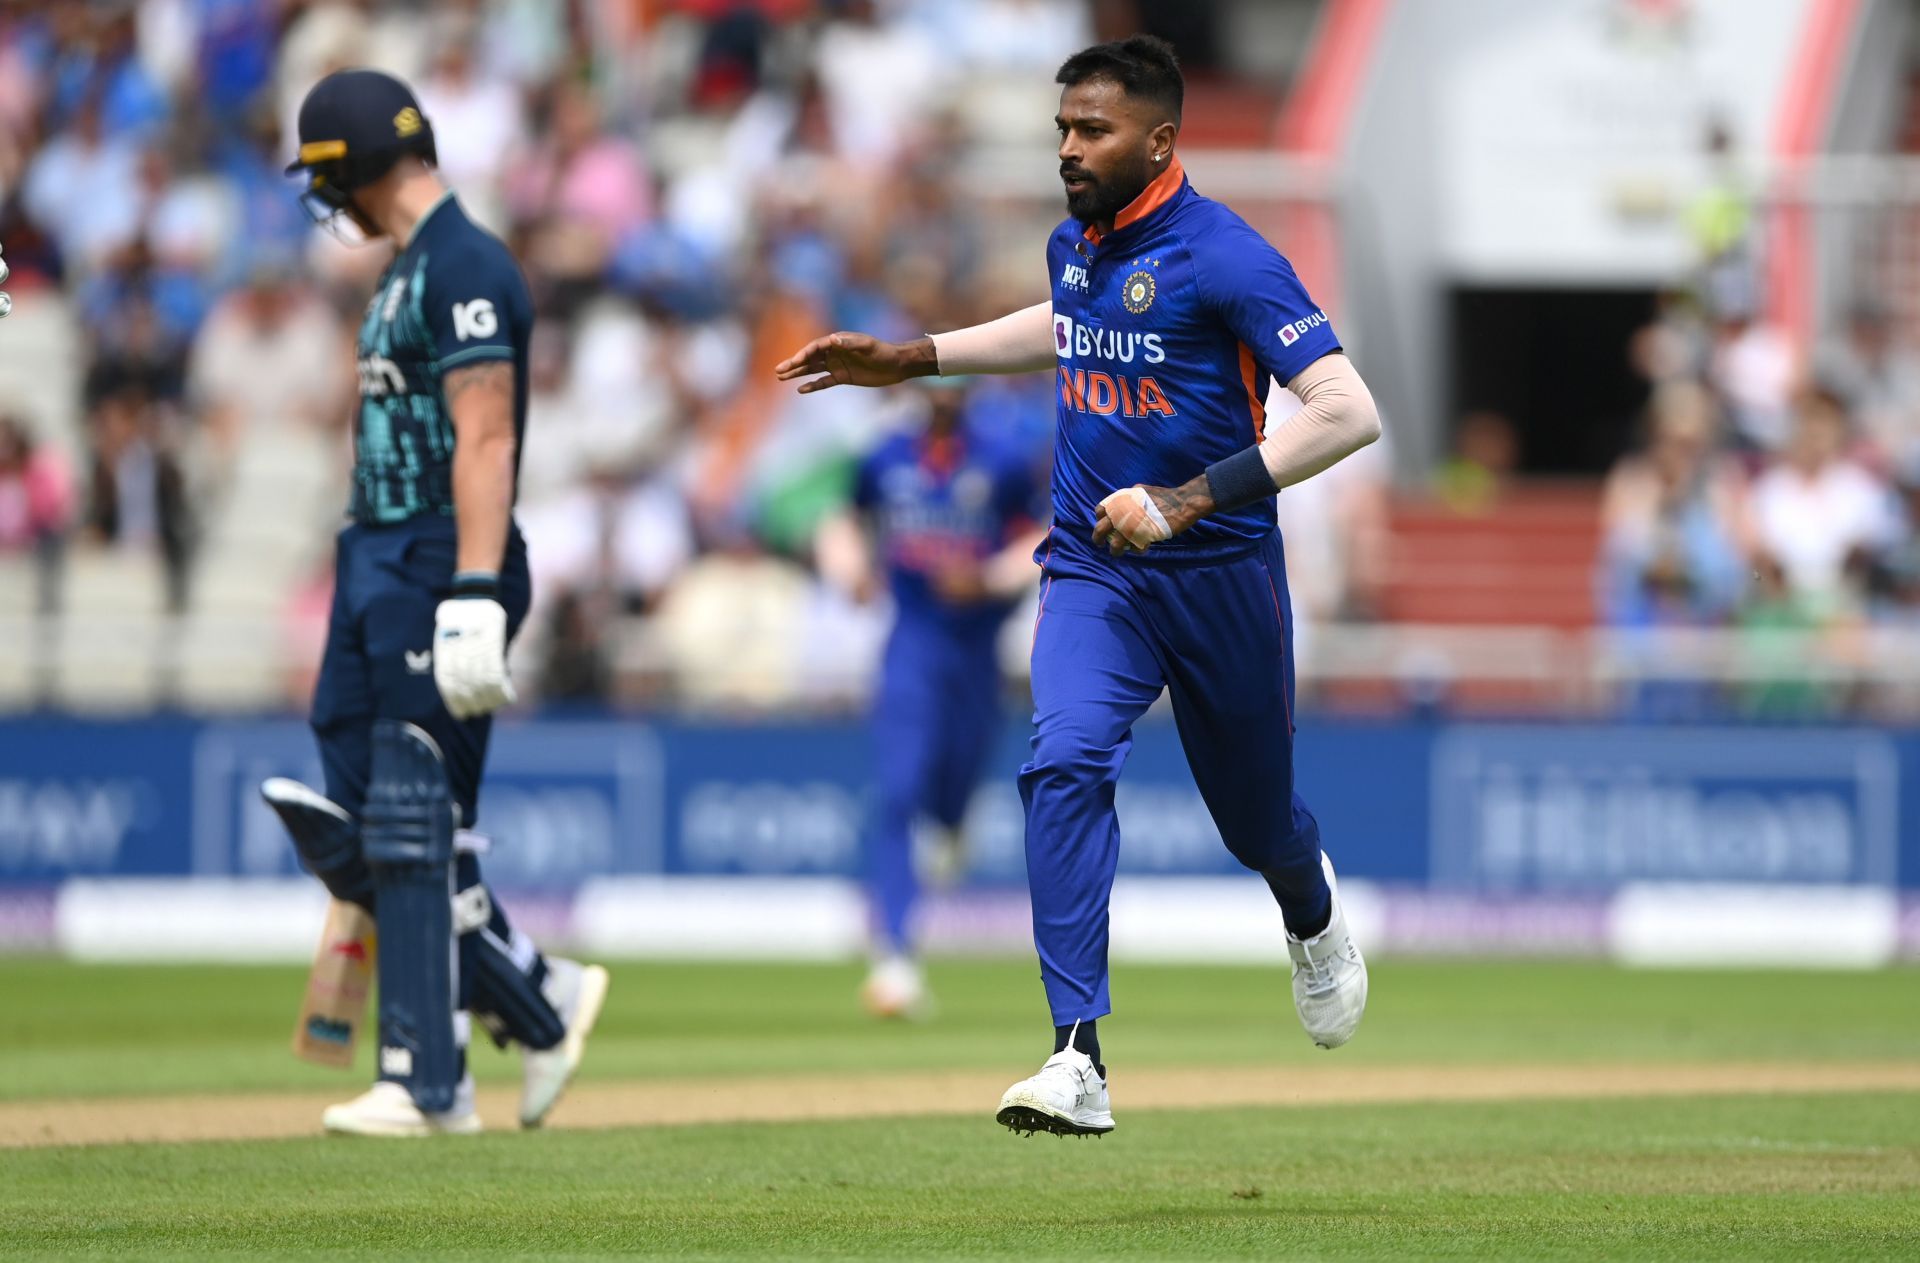 Hardik Pandya had an outstanding average of 12.33 with the ball in the ODI series against England